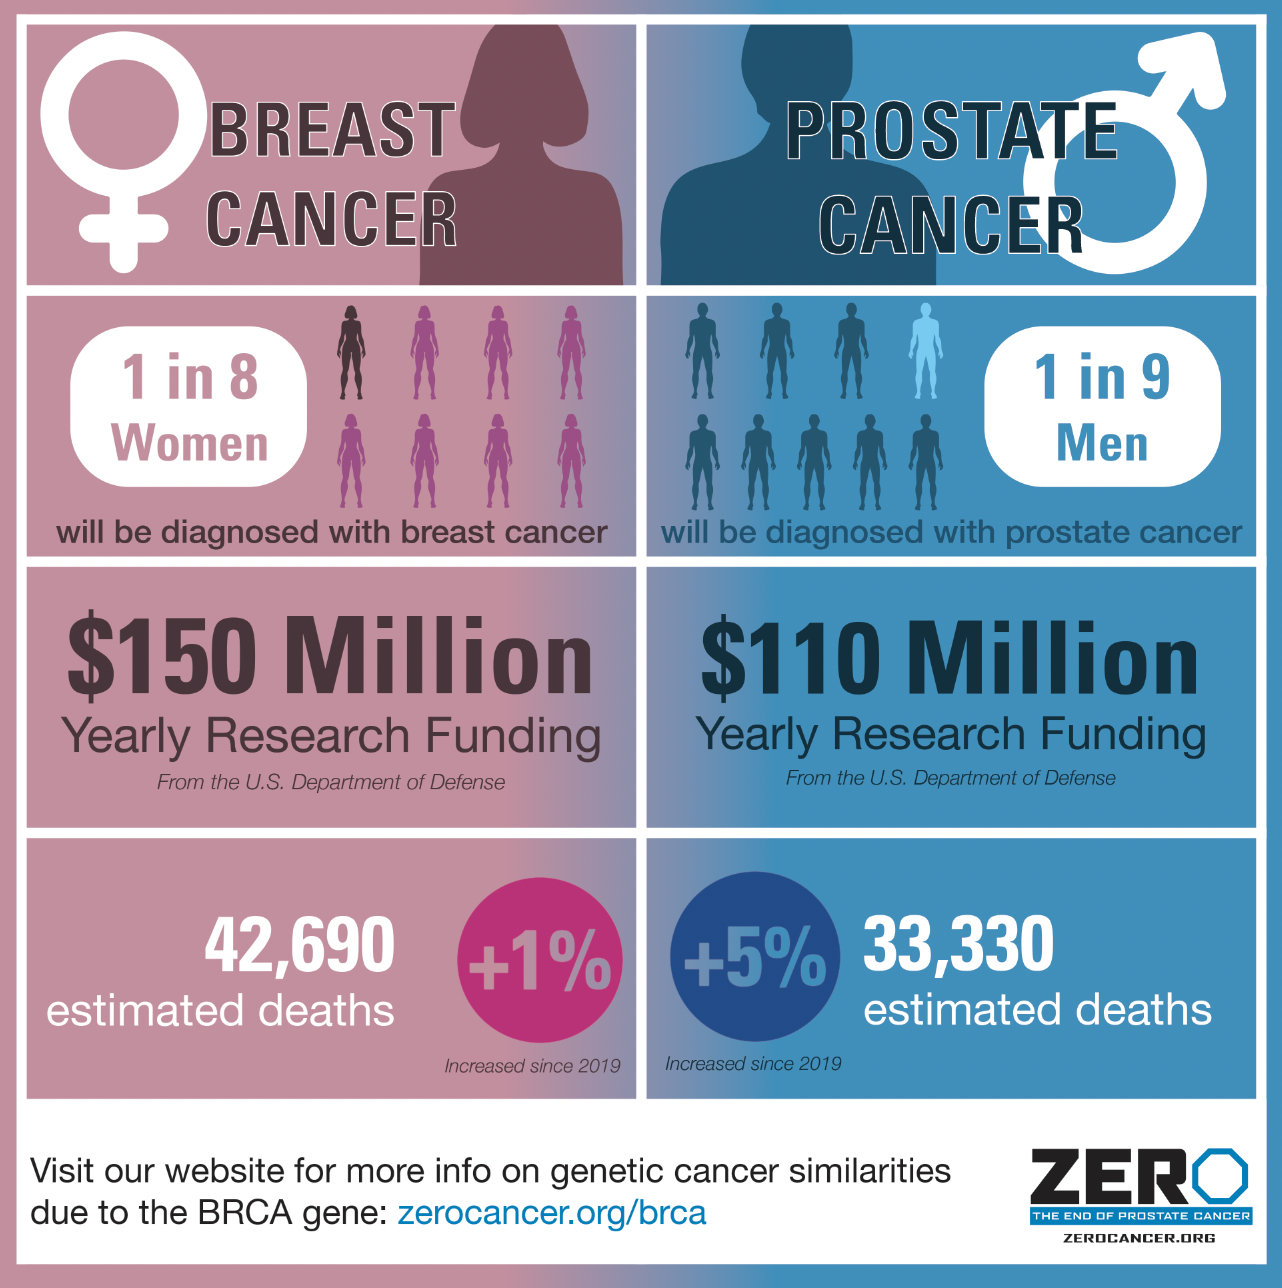 BREAST CANCER AND PROSTATE CANCER